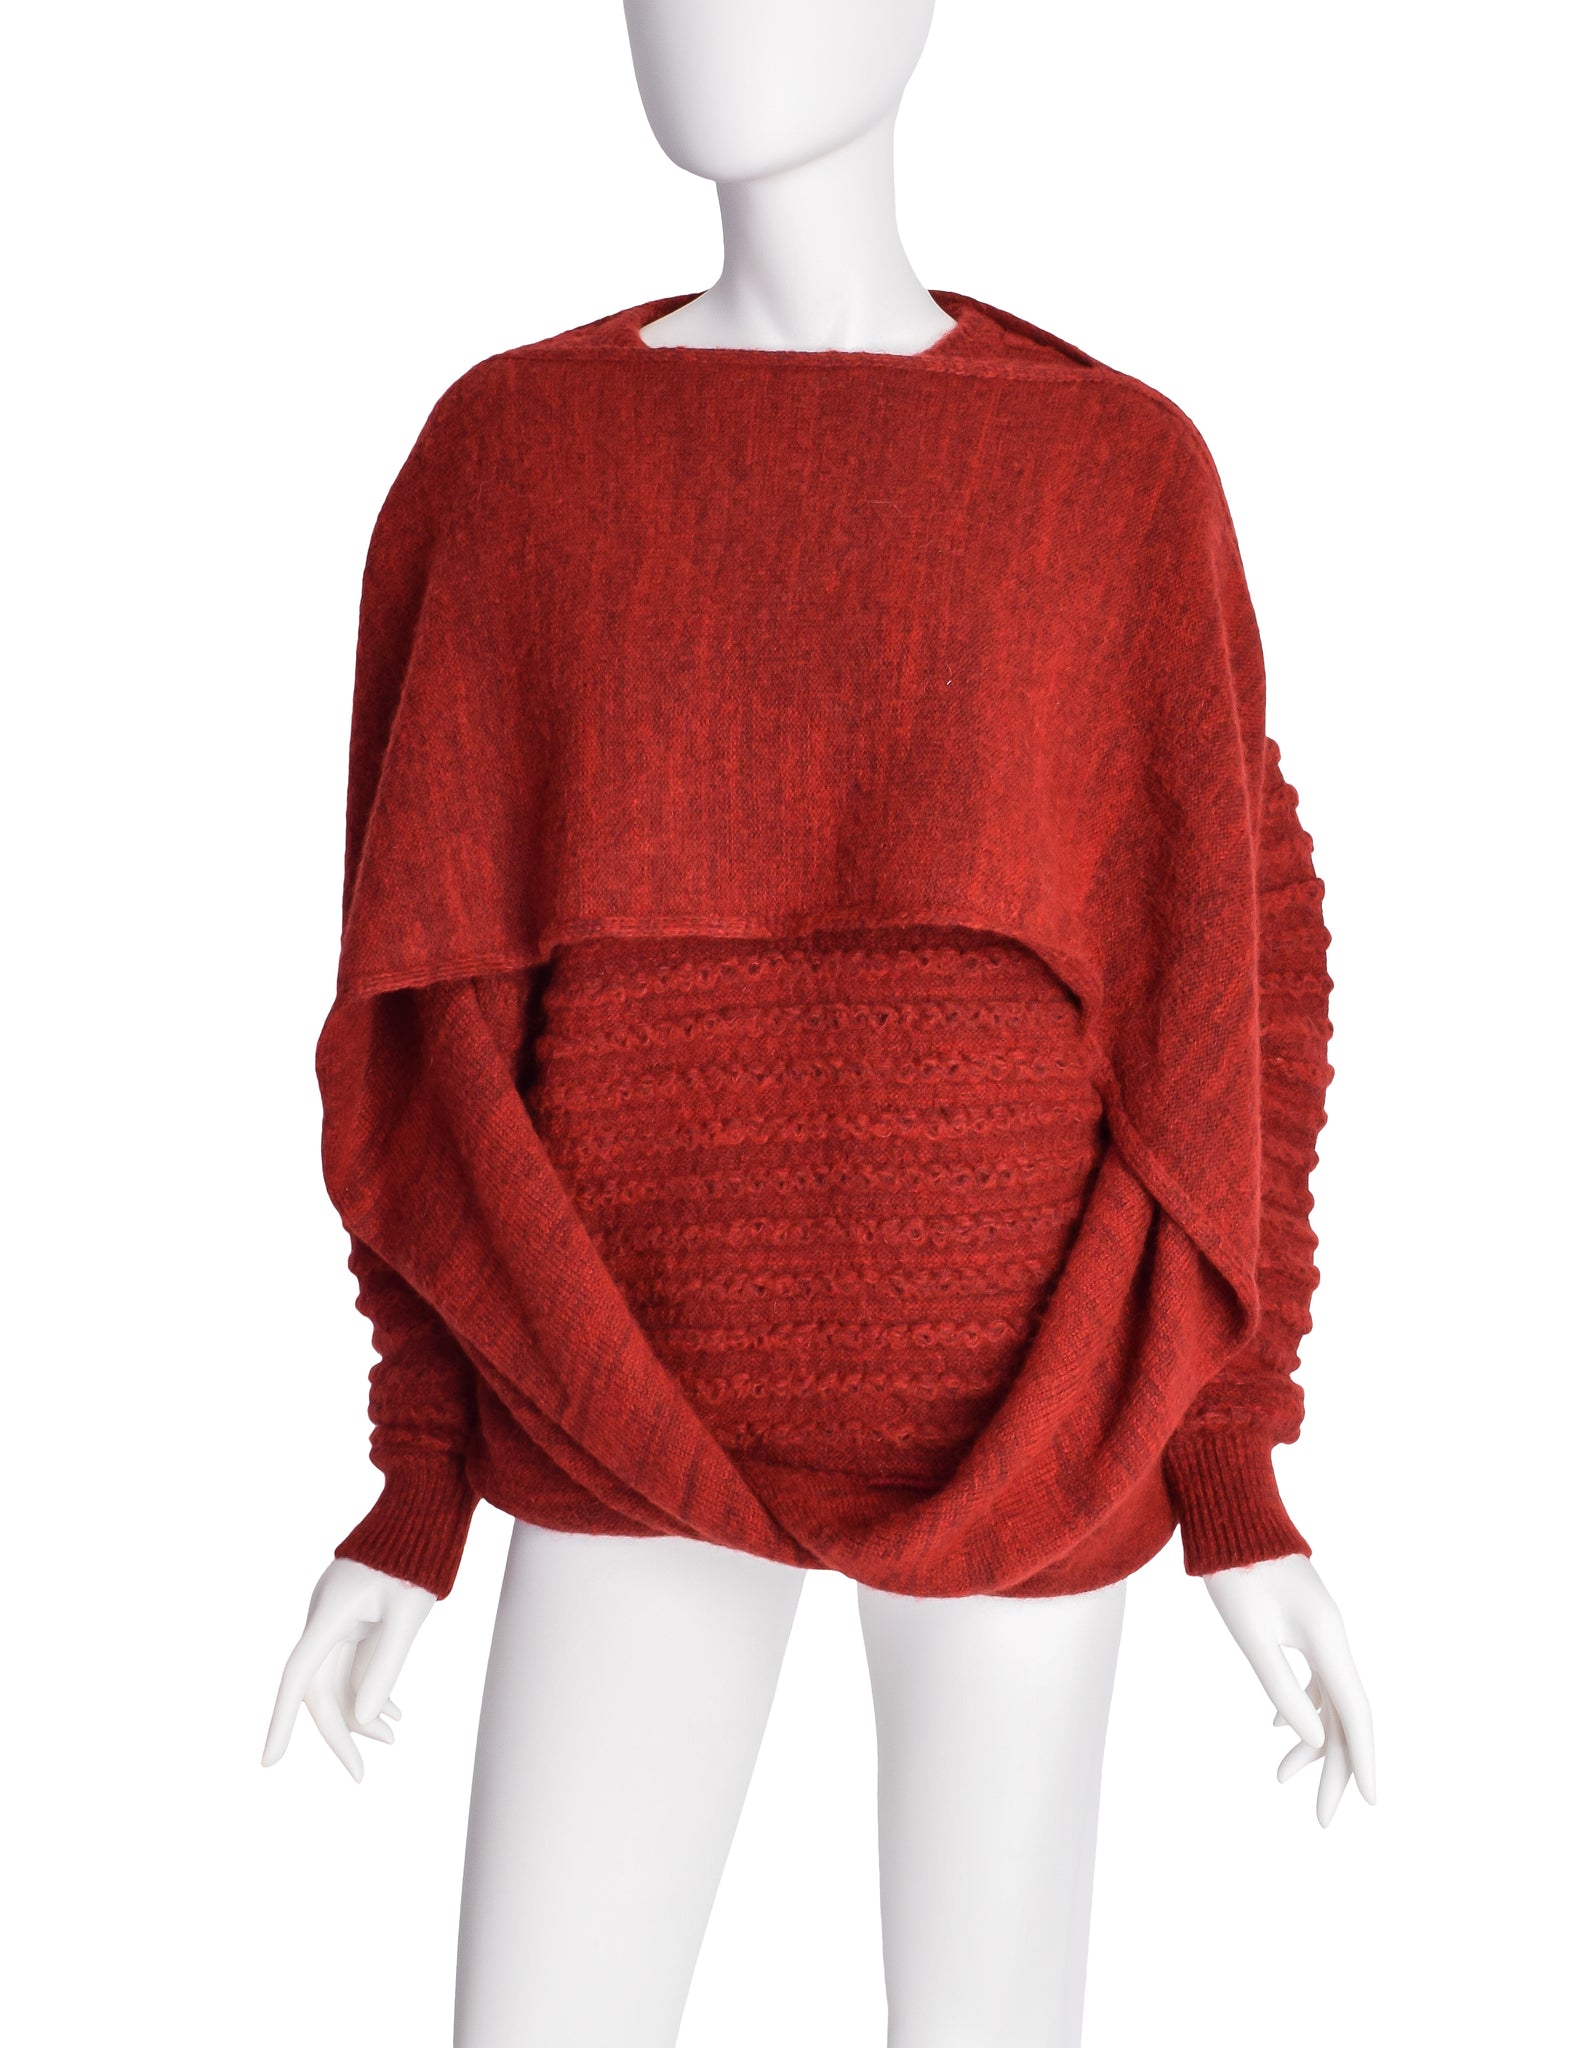 Issey Miyake Vintage Rusty Red Knit Wool Blend Convertible Sweater